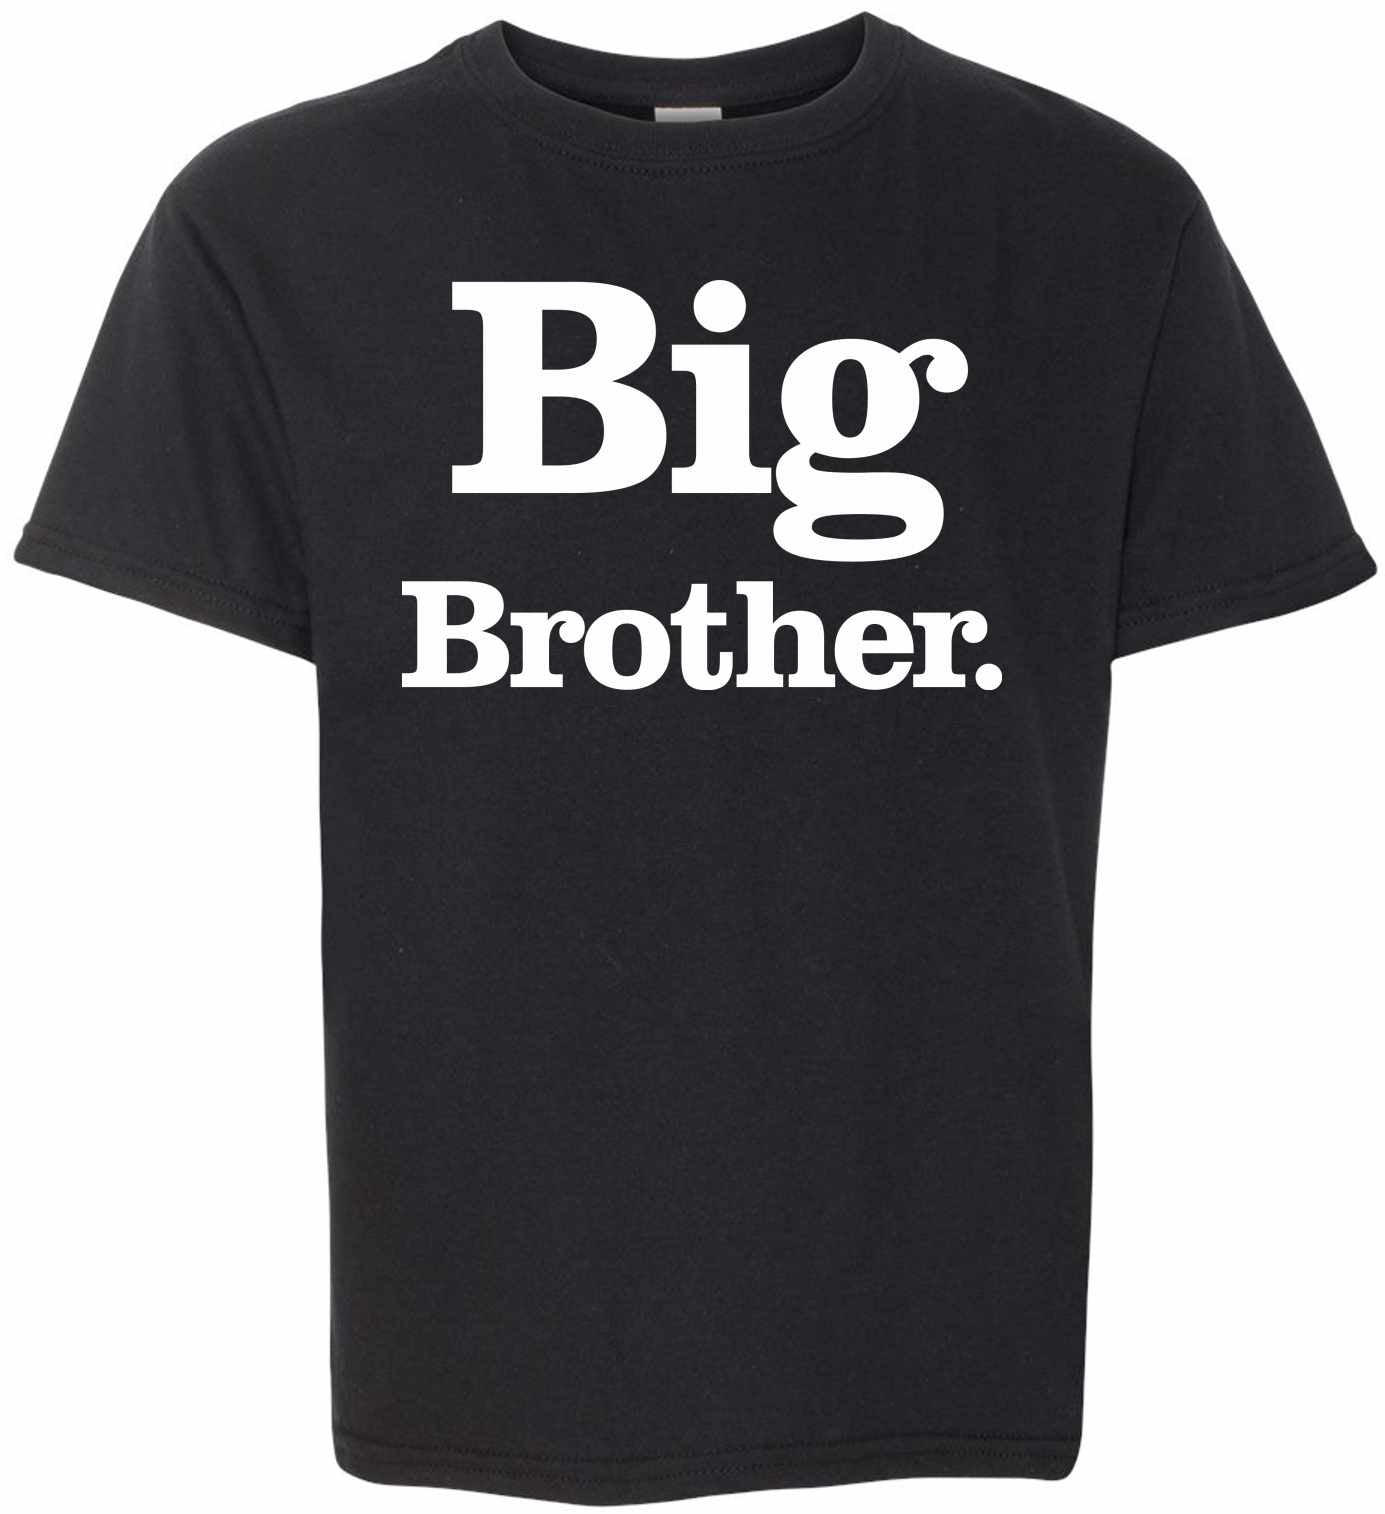 Big Brother (period) on Youth T-Shirt (#976-201)